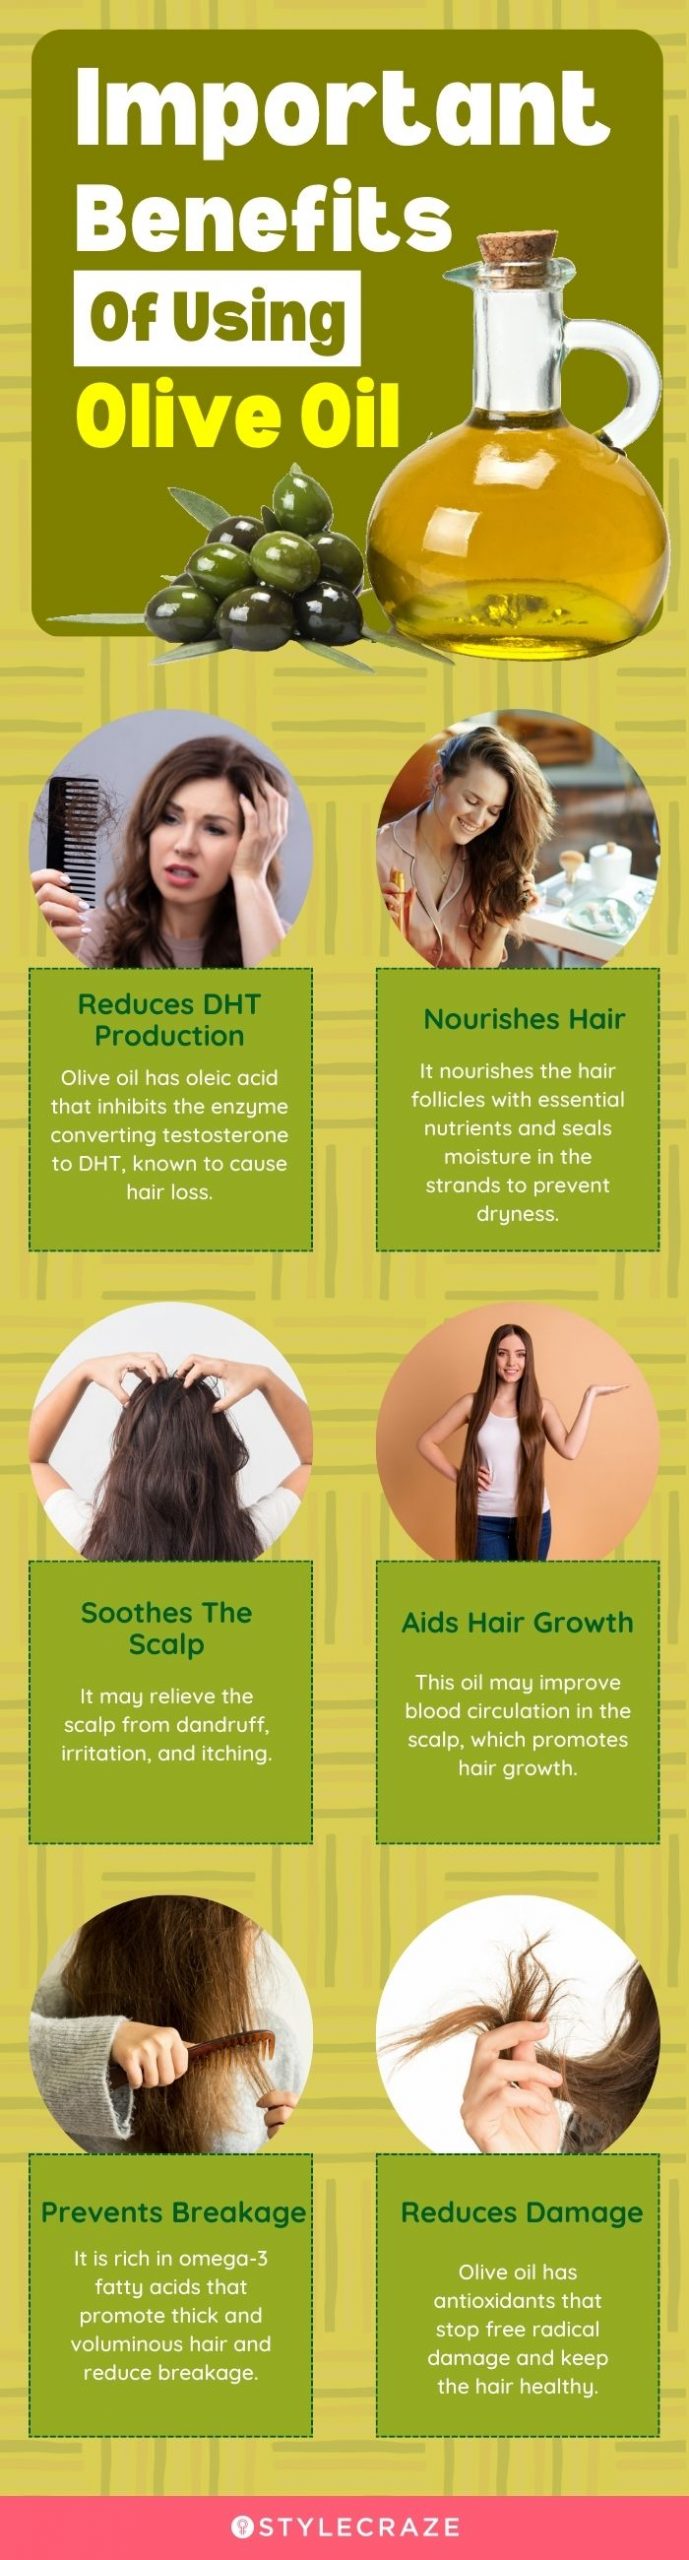 6 Tips to Make Your Hair Grow Faster With Olive Oil